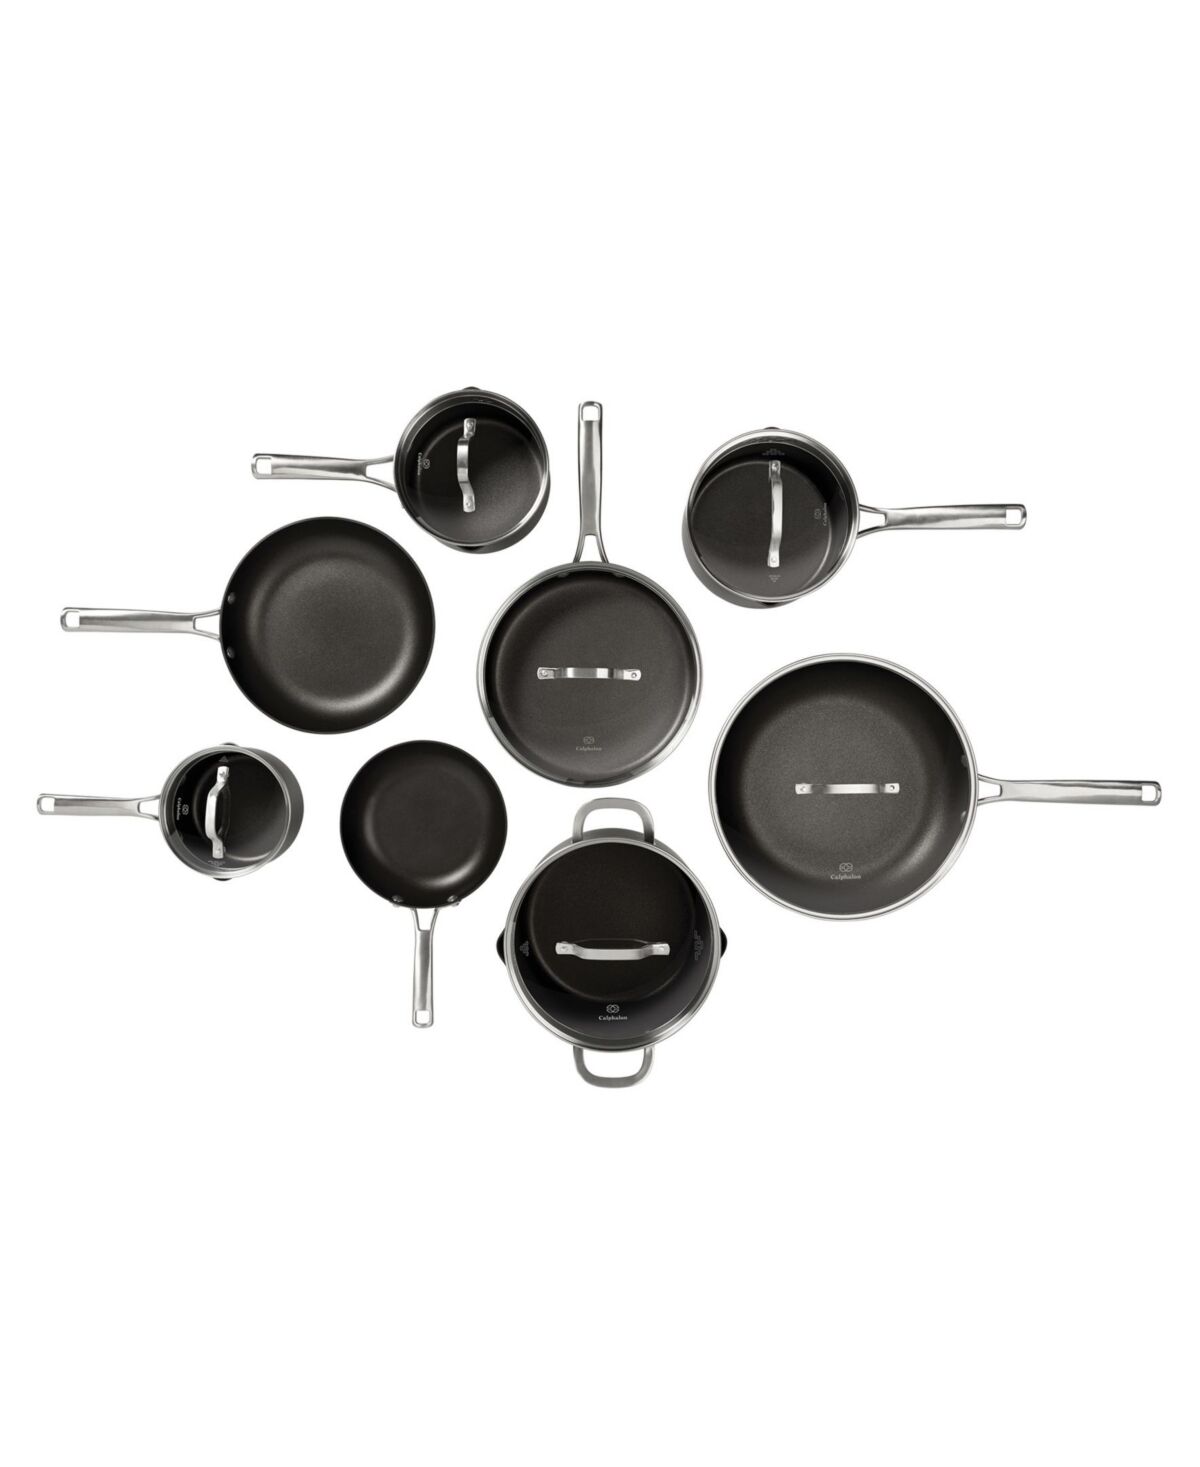 Calphalon Classic Hard-Anodized Nonstick Cookware 14-Piece Pots and Pans Set - Black, Stainless Steel